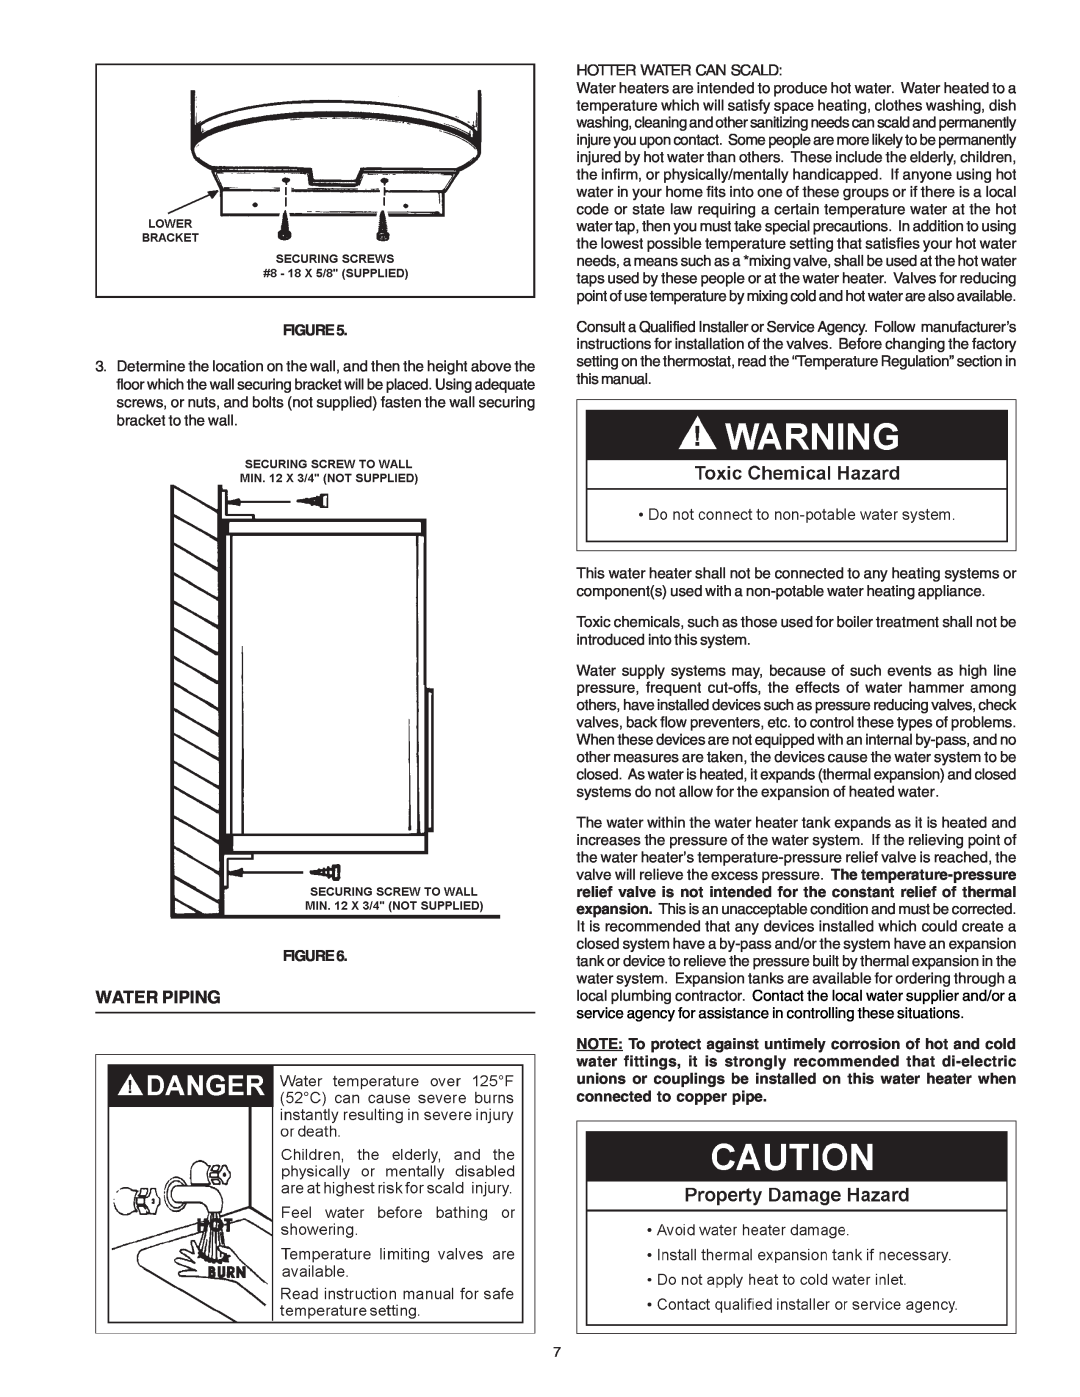 Reliance Water Heaters 184735-000 instruction manual Water Piping 